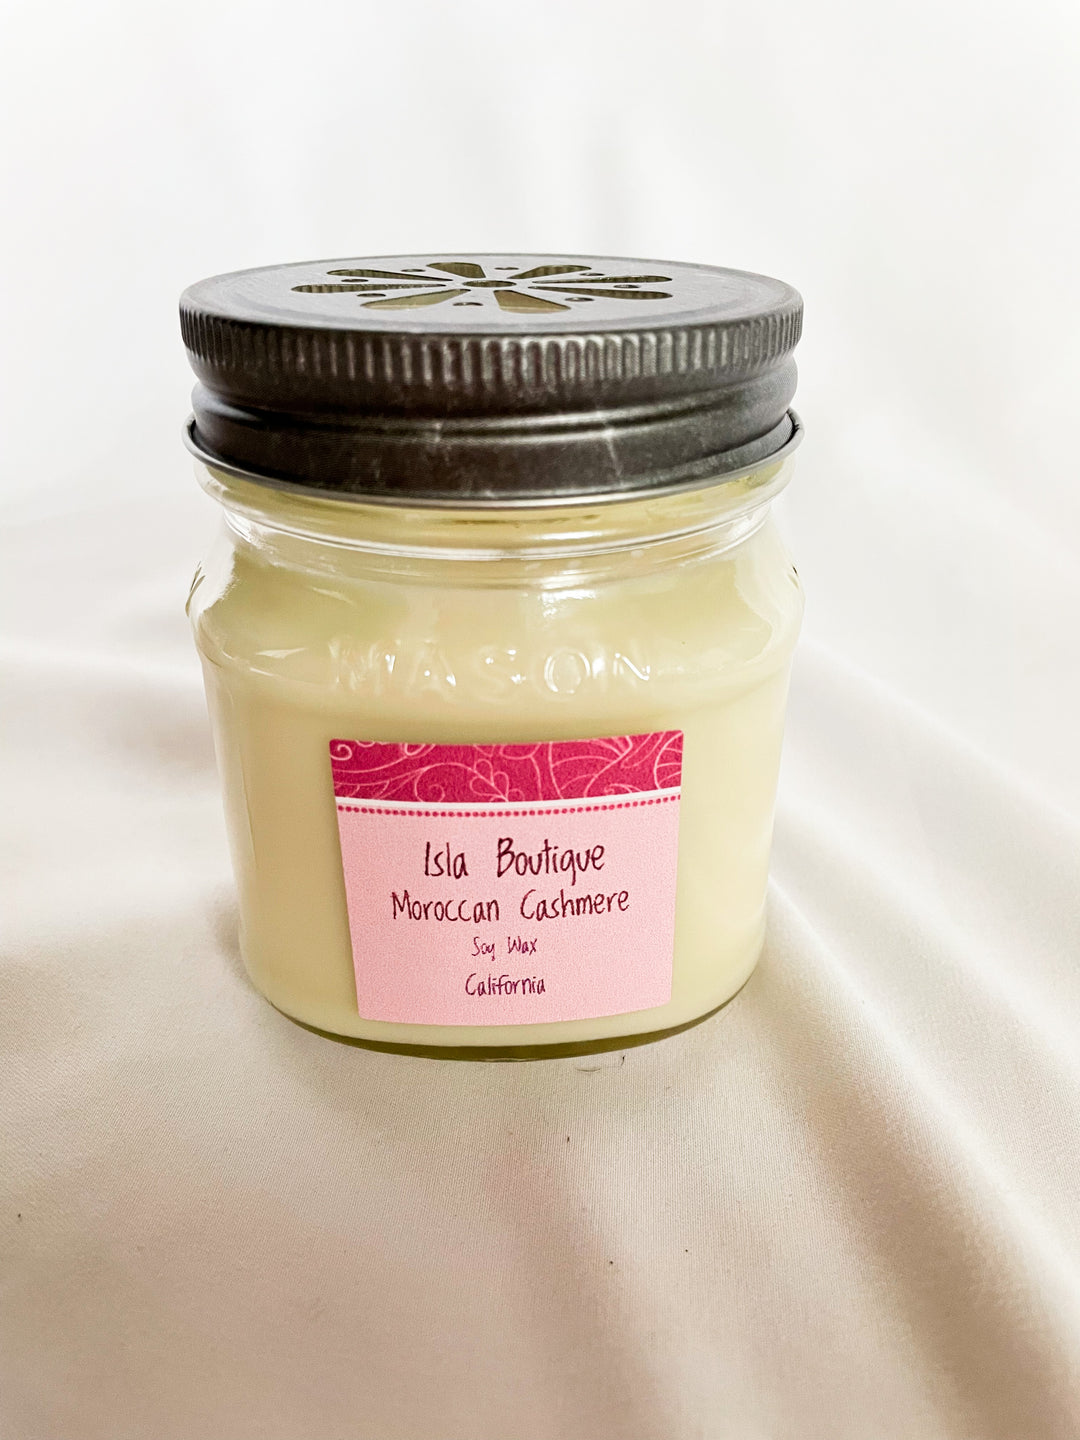 Moroccan Cashmere Soy Wax Candle 8oz